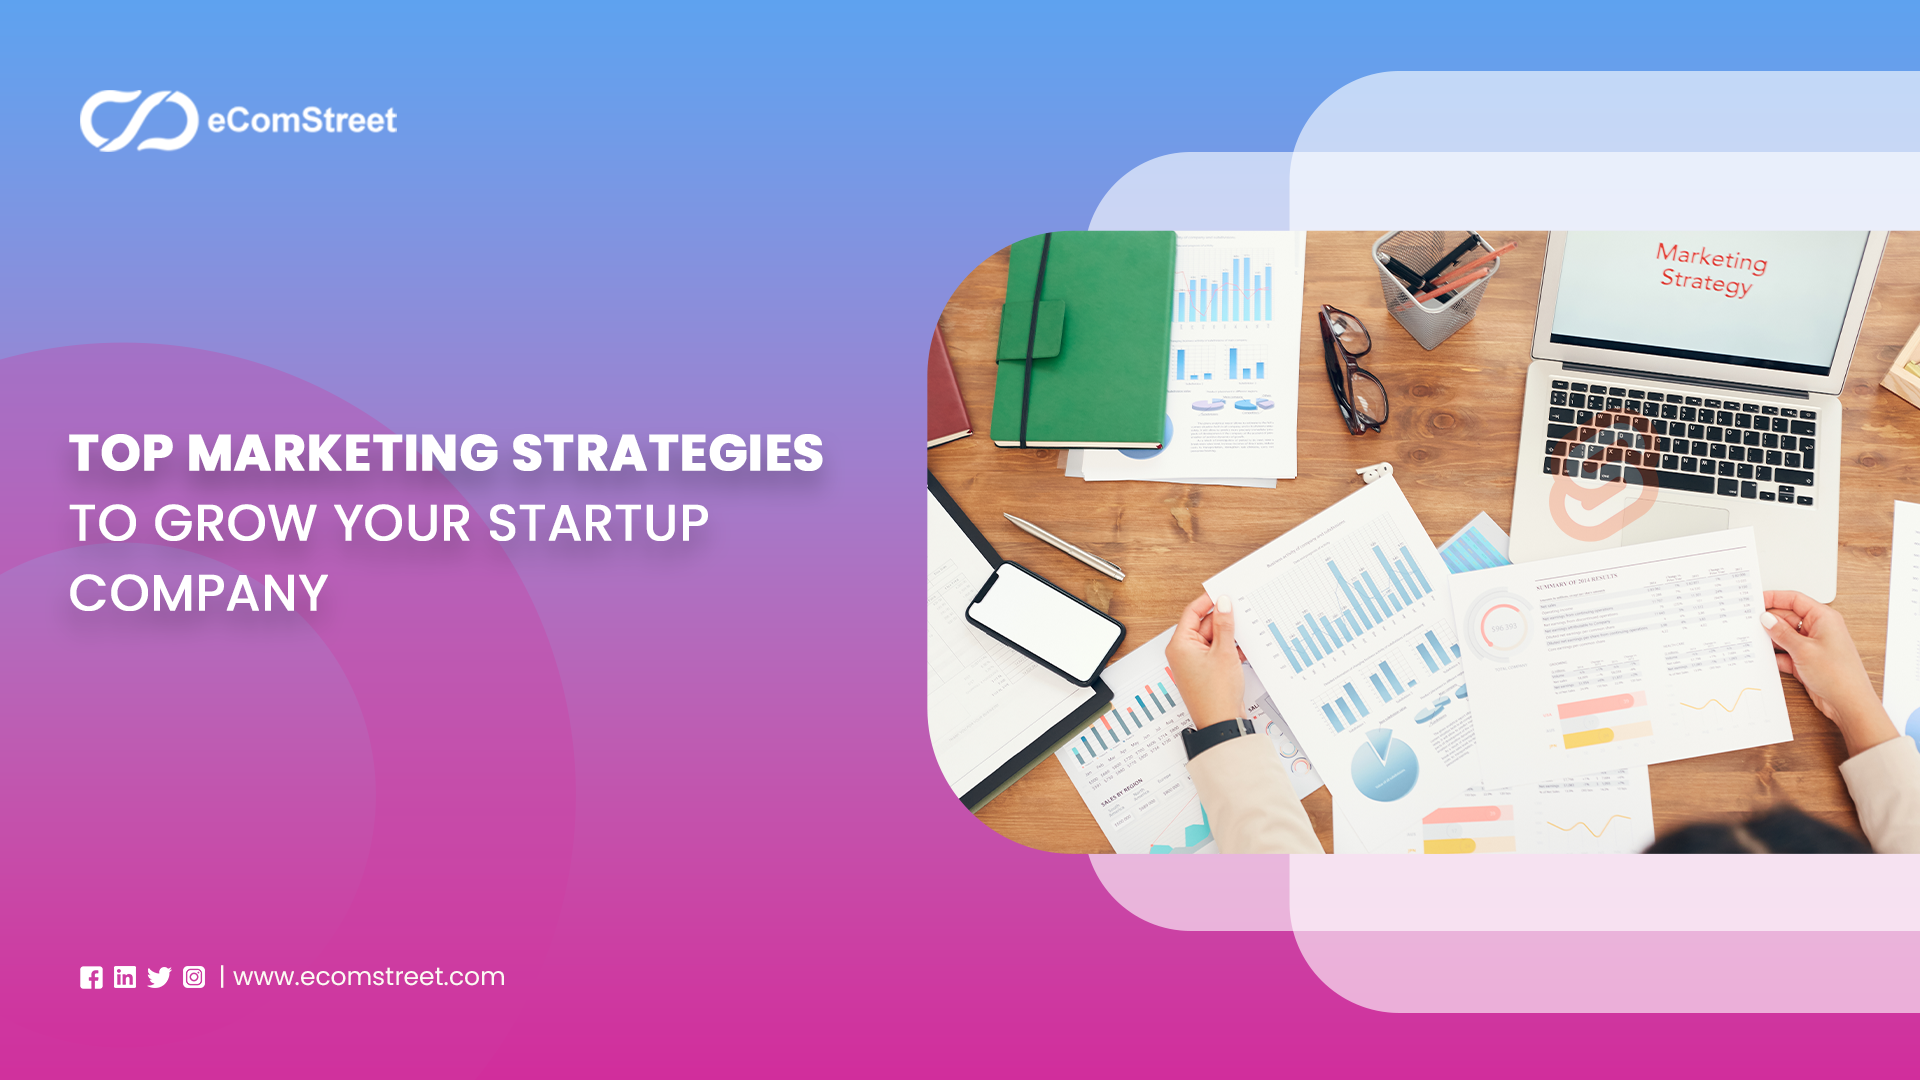 Top Marketing Strategies to Grow Your Startup Company